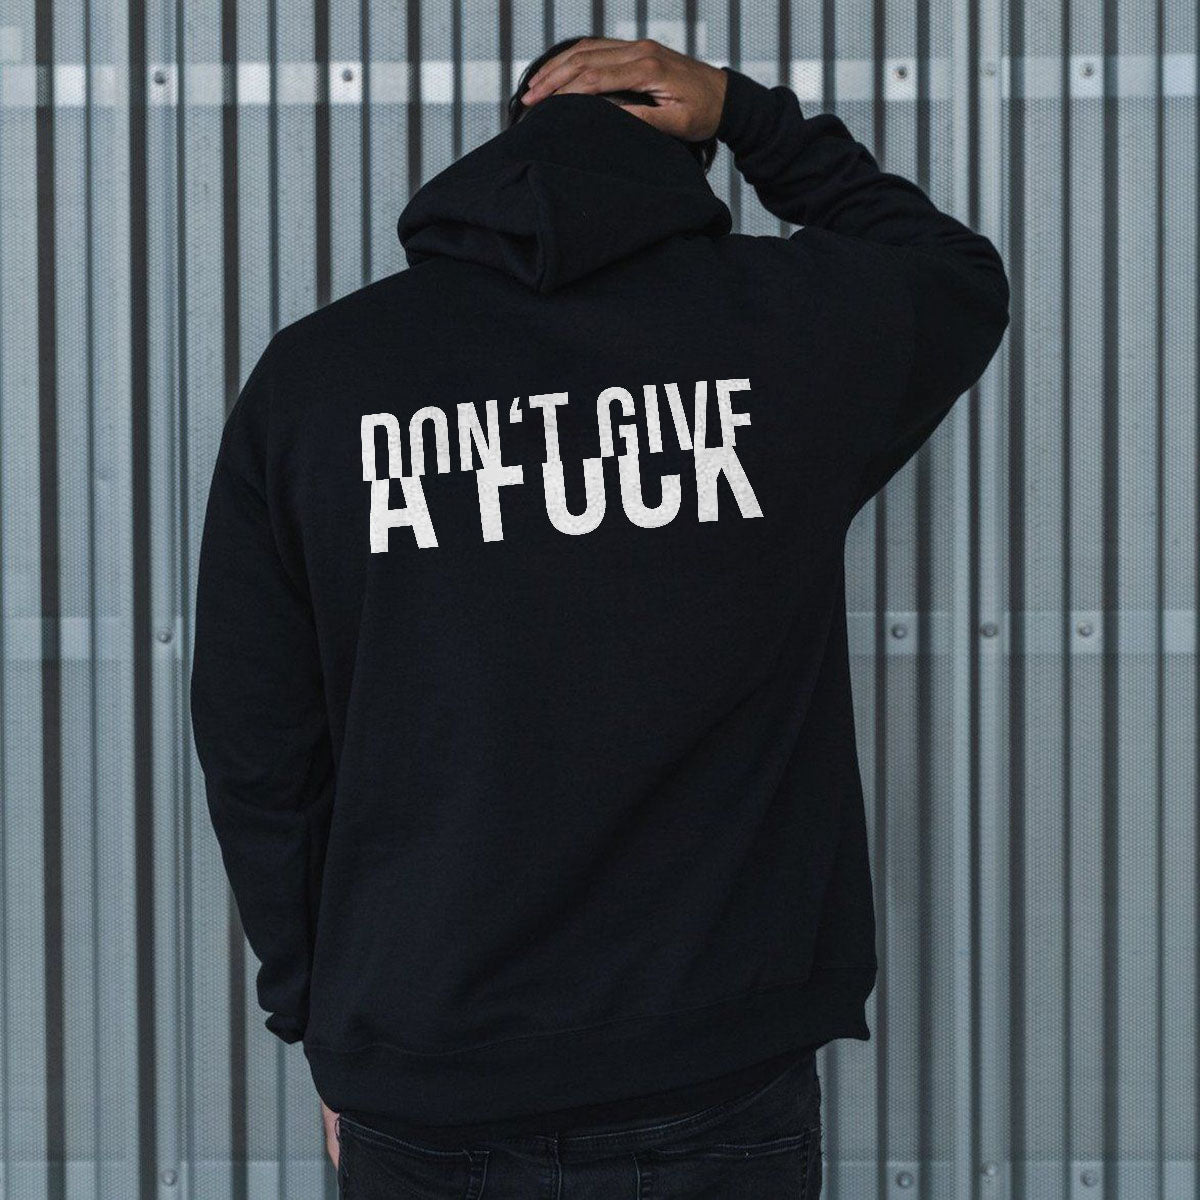 Don't Give A Fuck Printed Men's All-match Hoodie